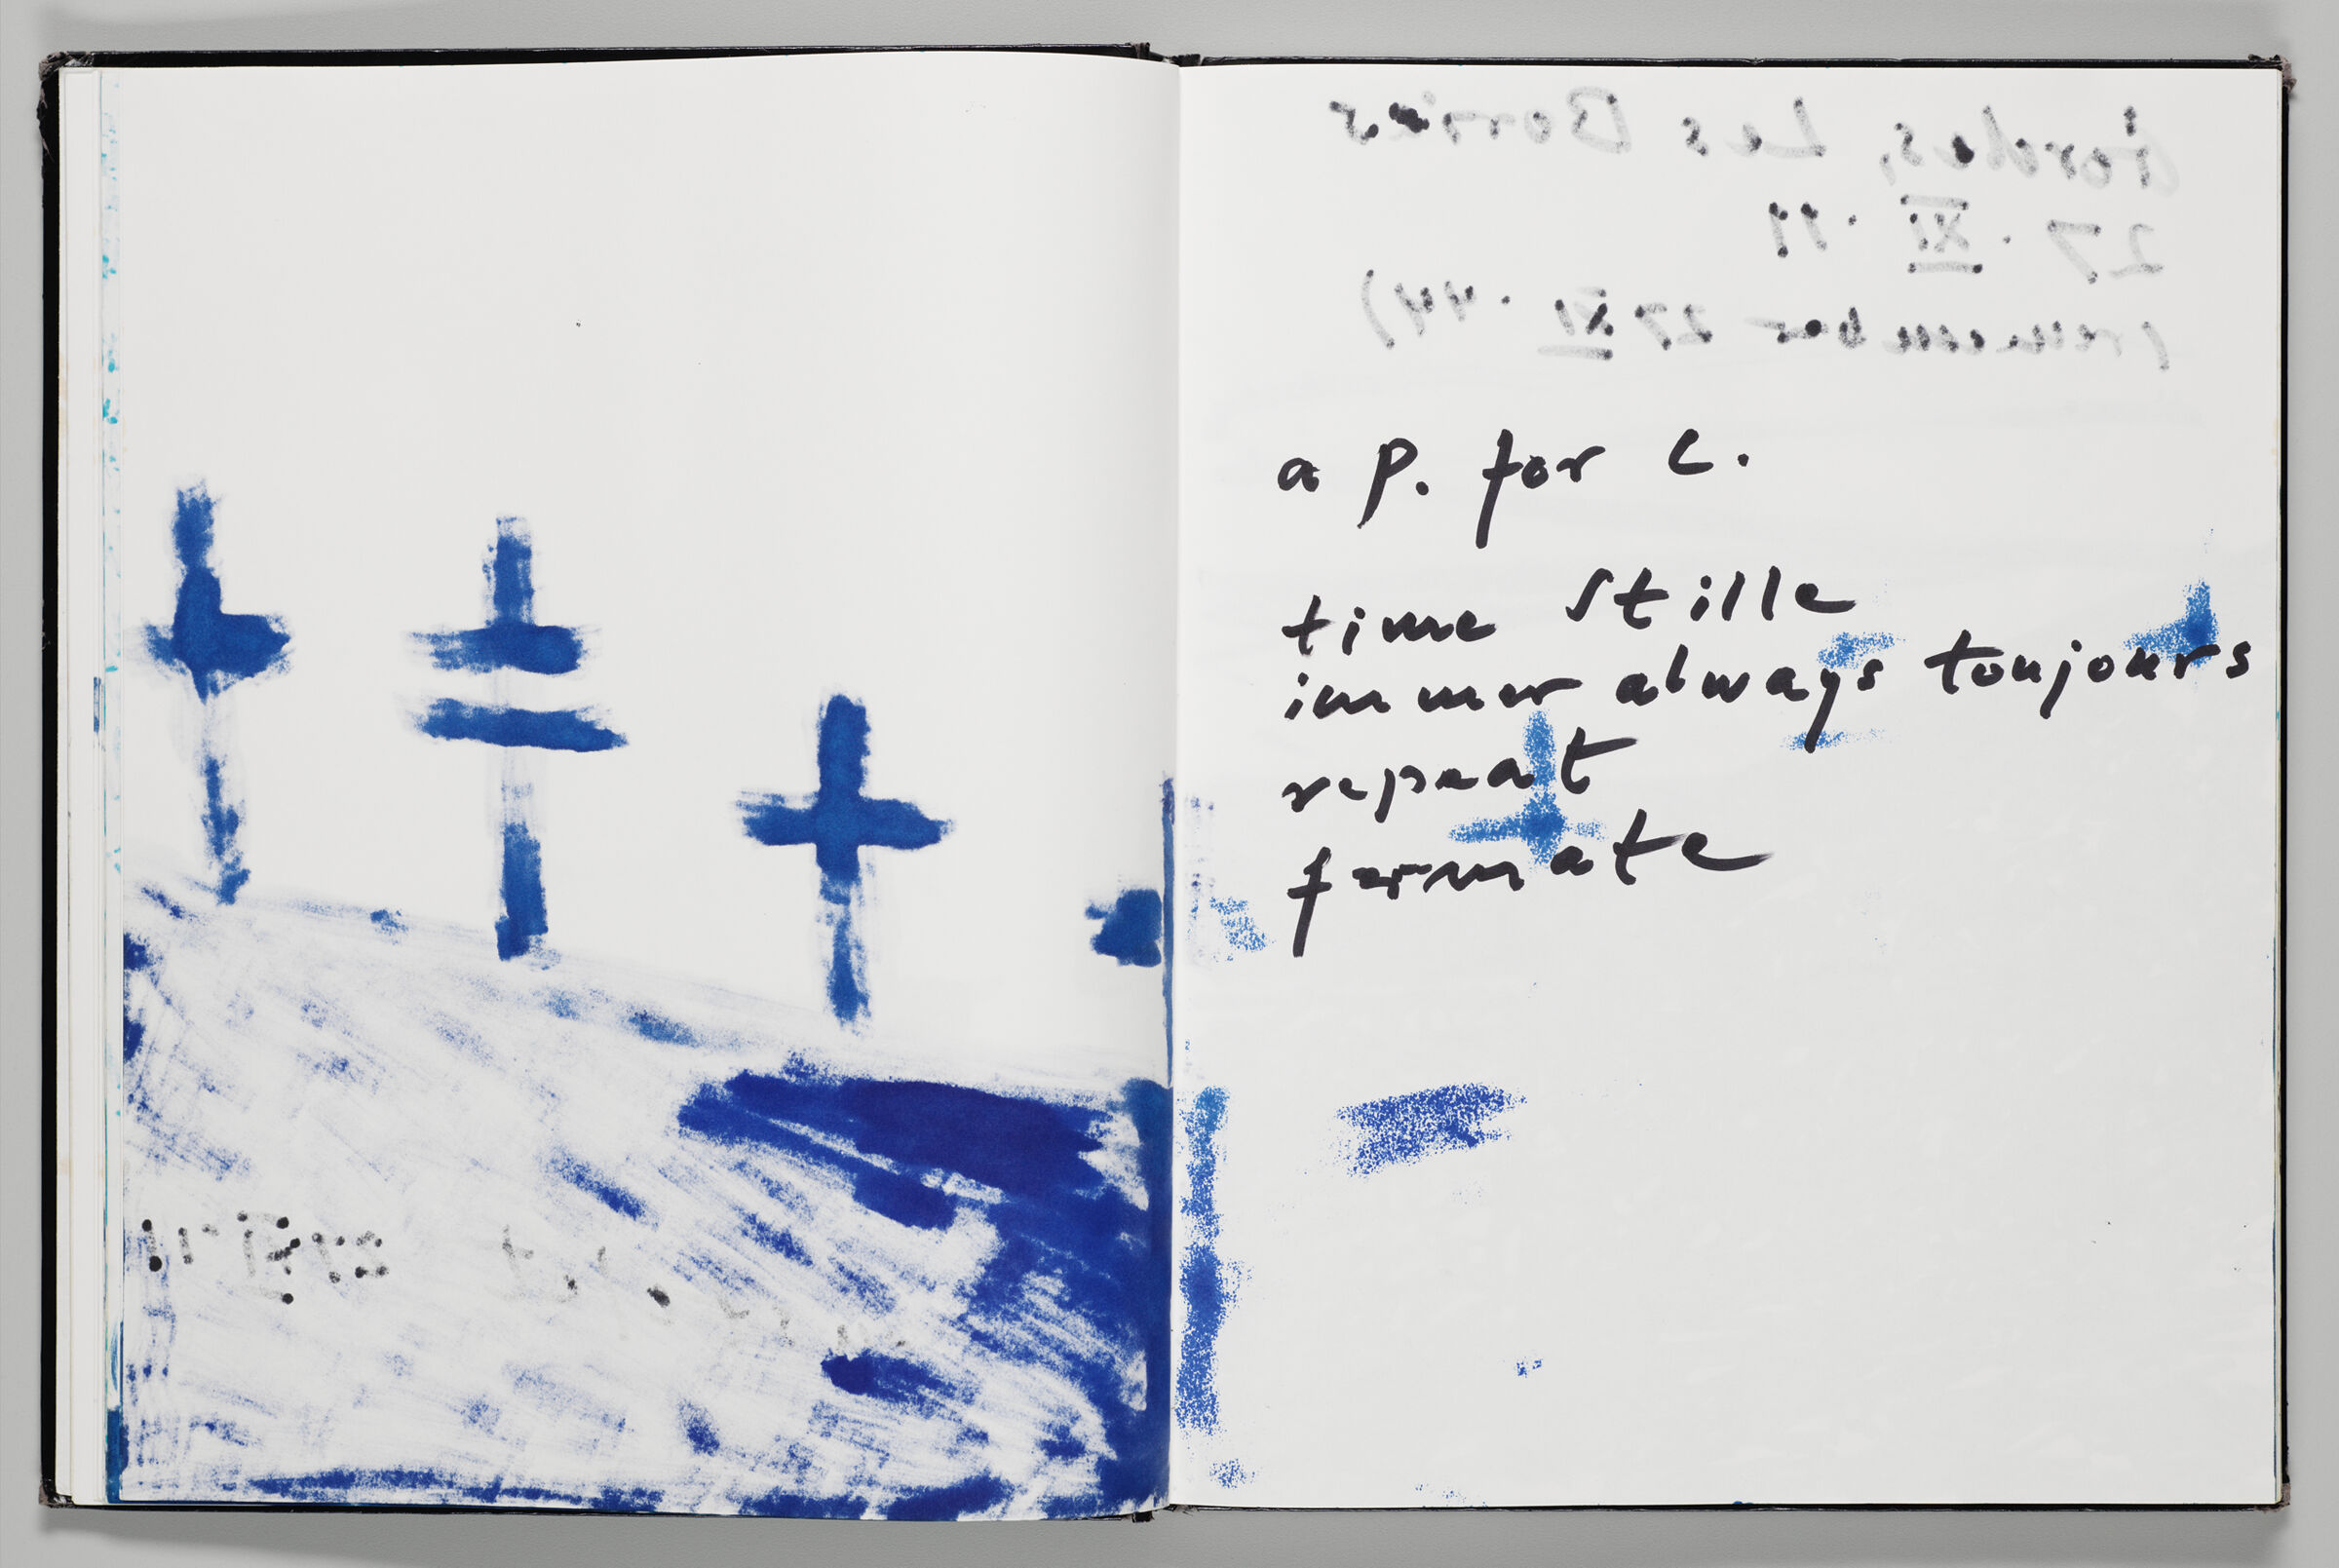 Untitled (Bleed-Through Of Previous Page, Left Page); Untitled (Notes With Color Transfer And Bleed-Through, Right Page)